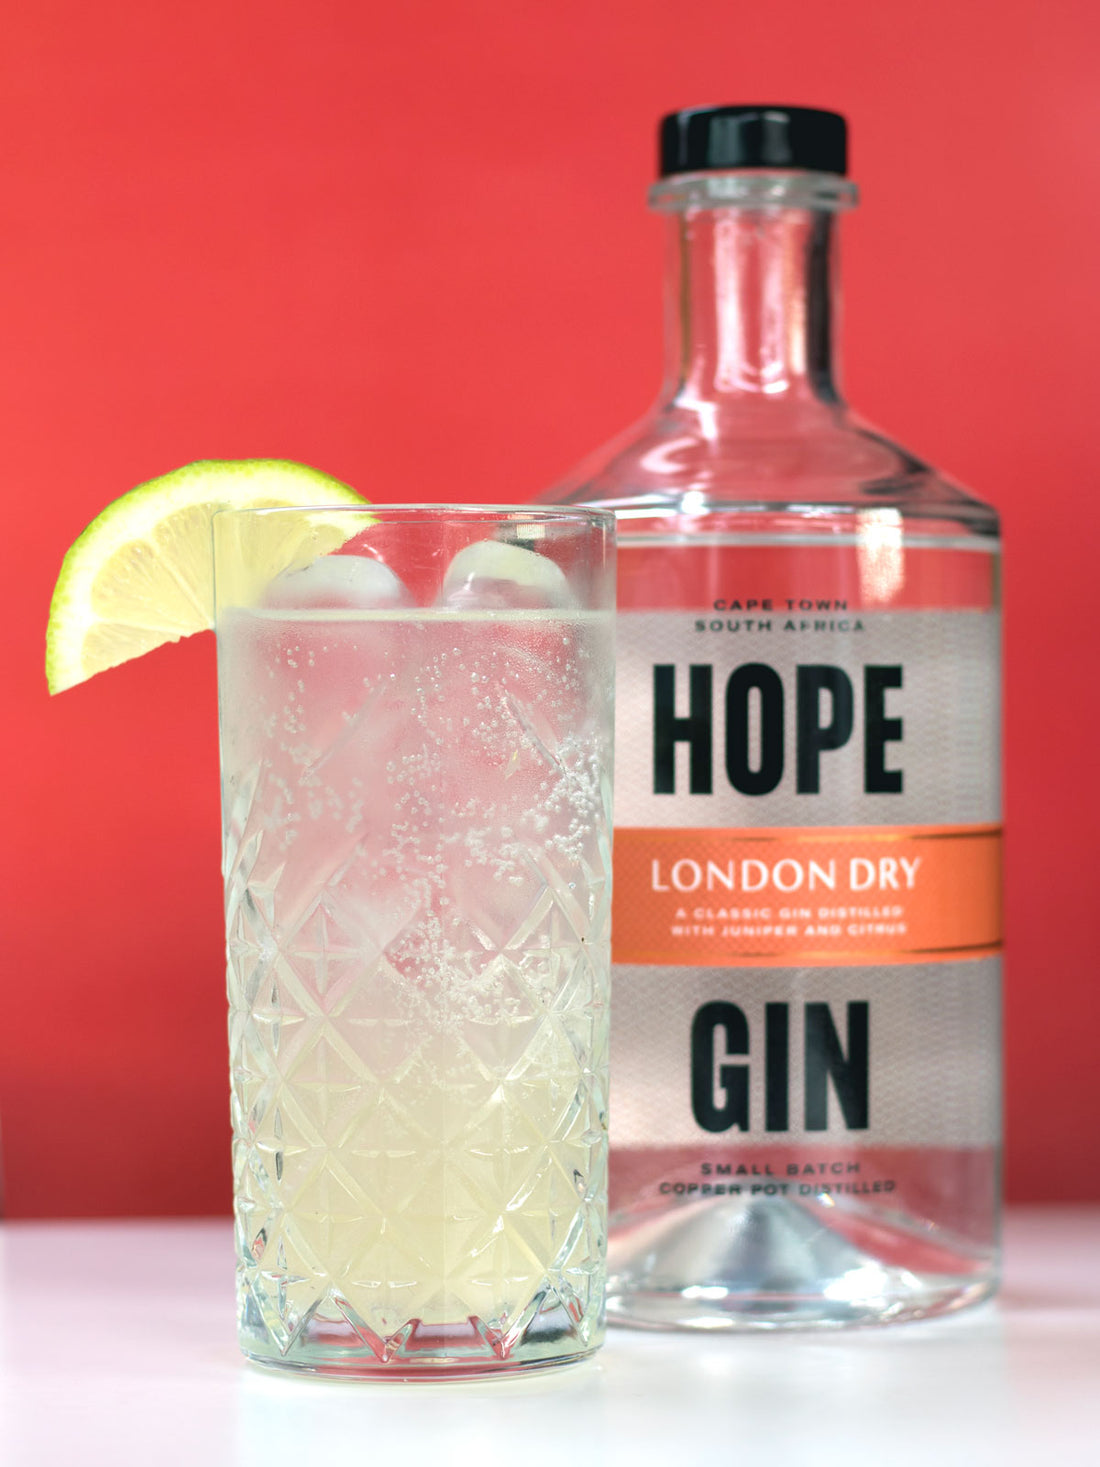 THE HOPE TOM COLLINS